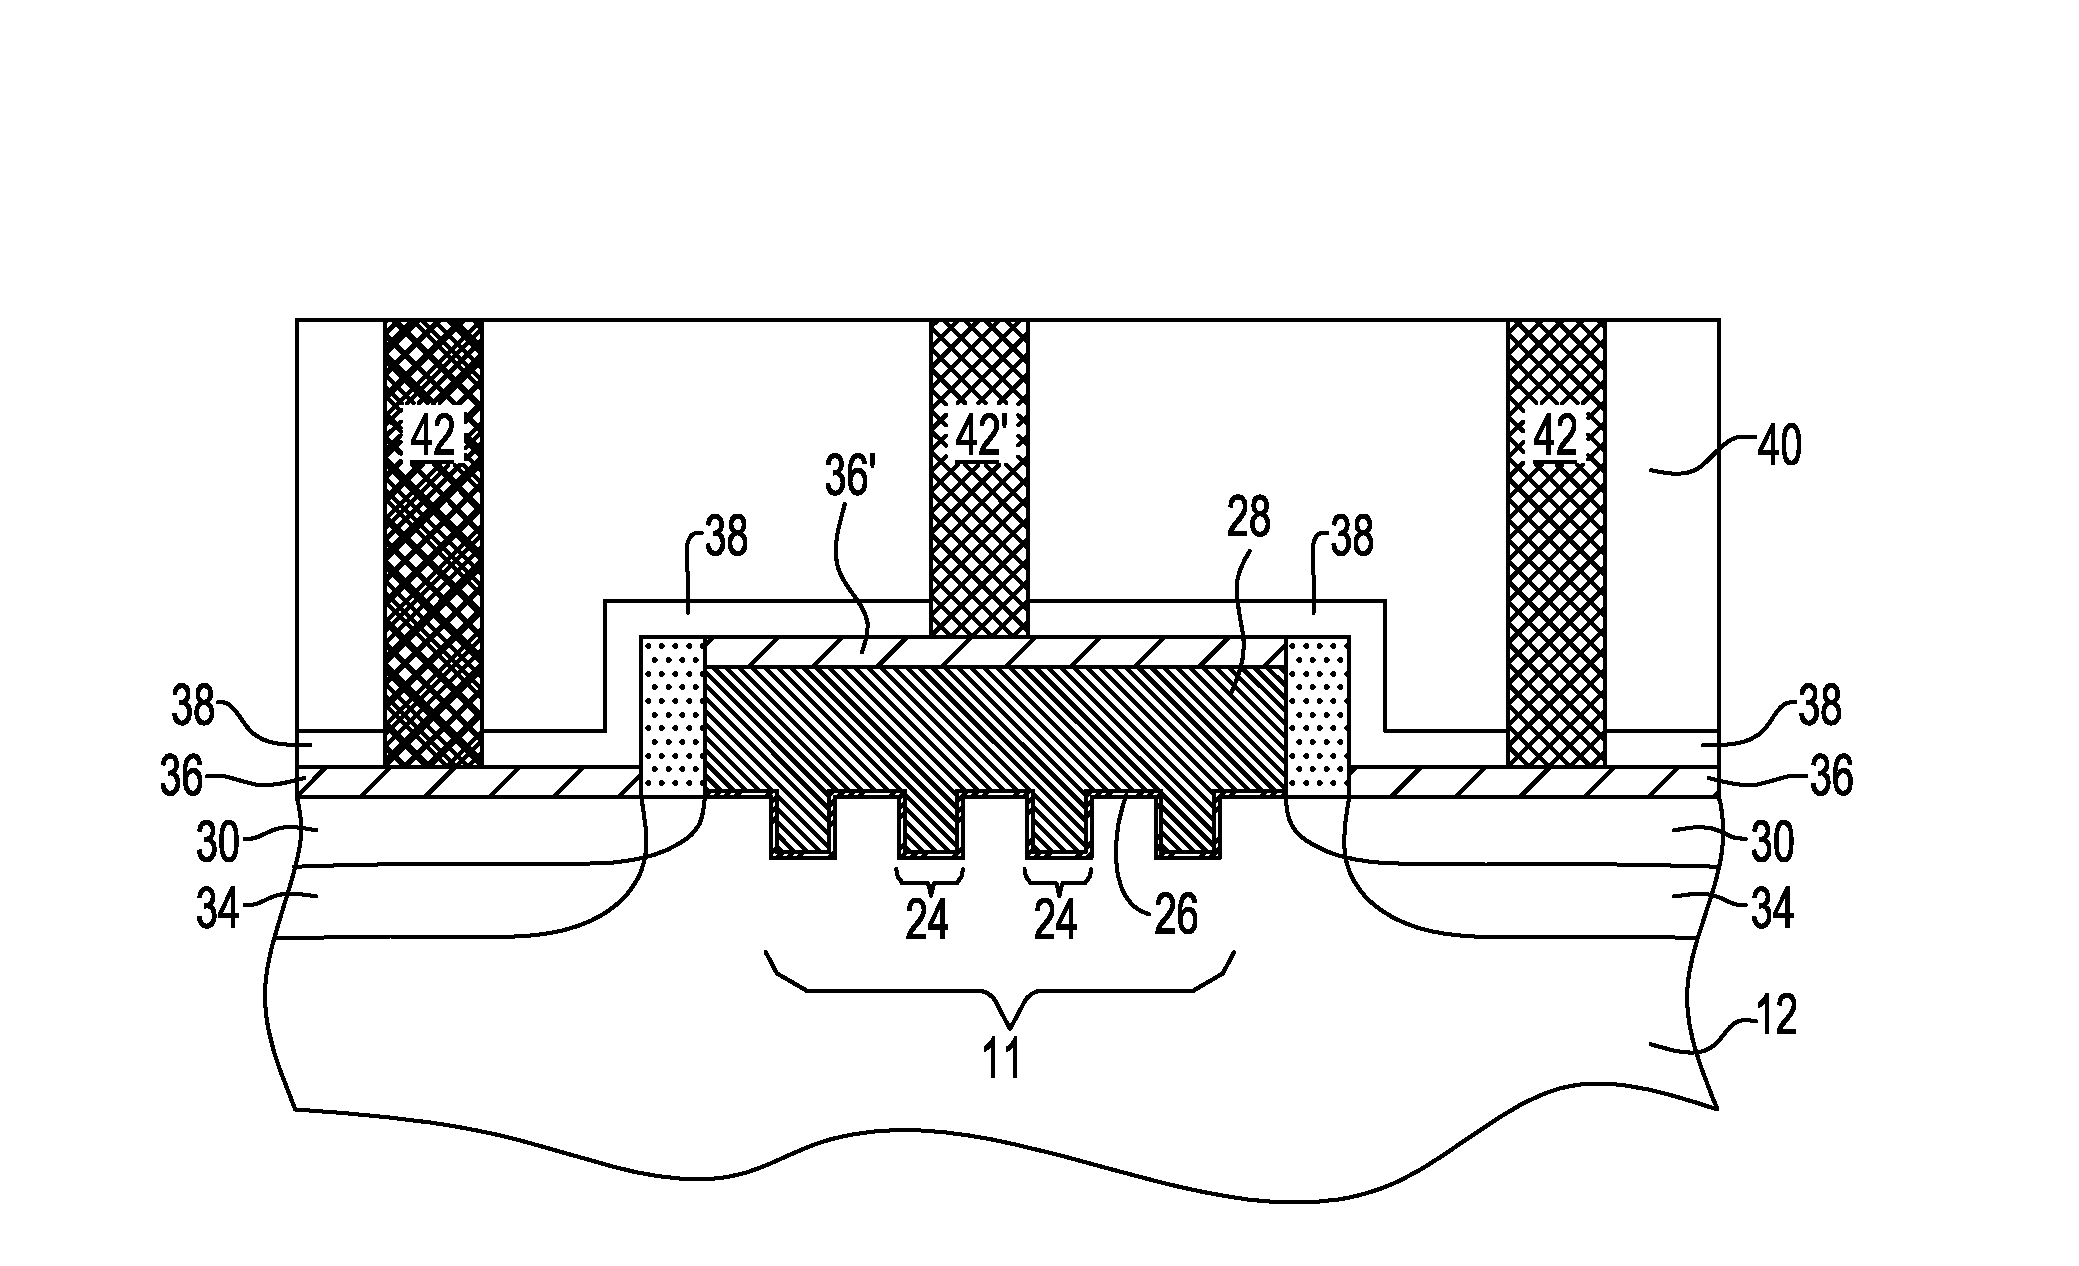 Structure and method for compact long-channel FETs